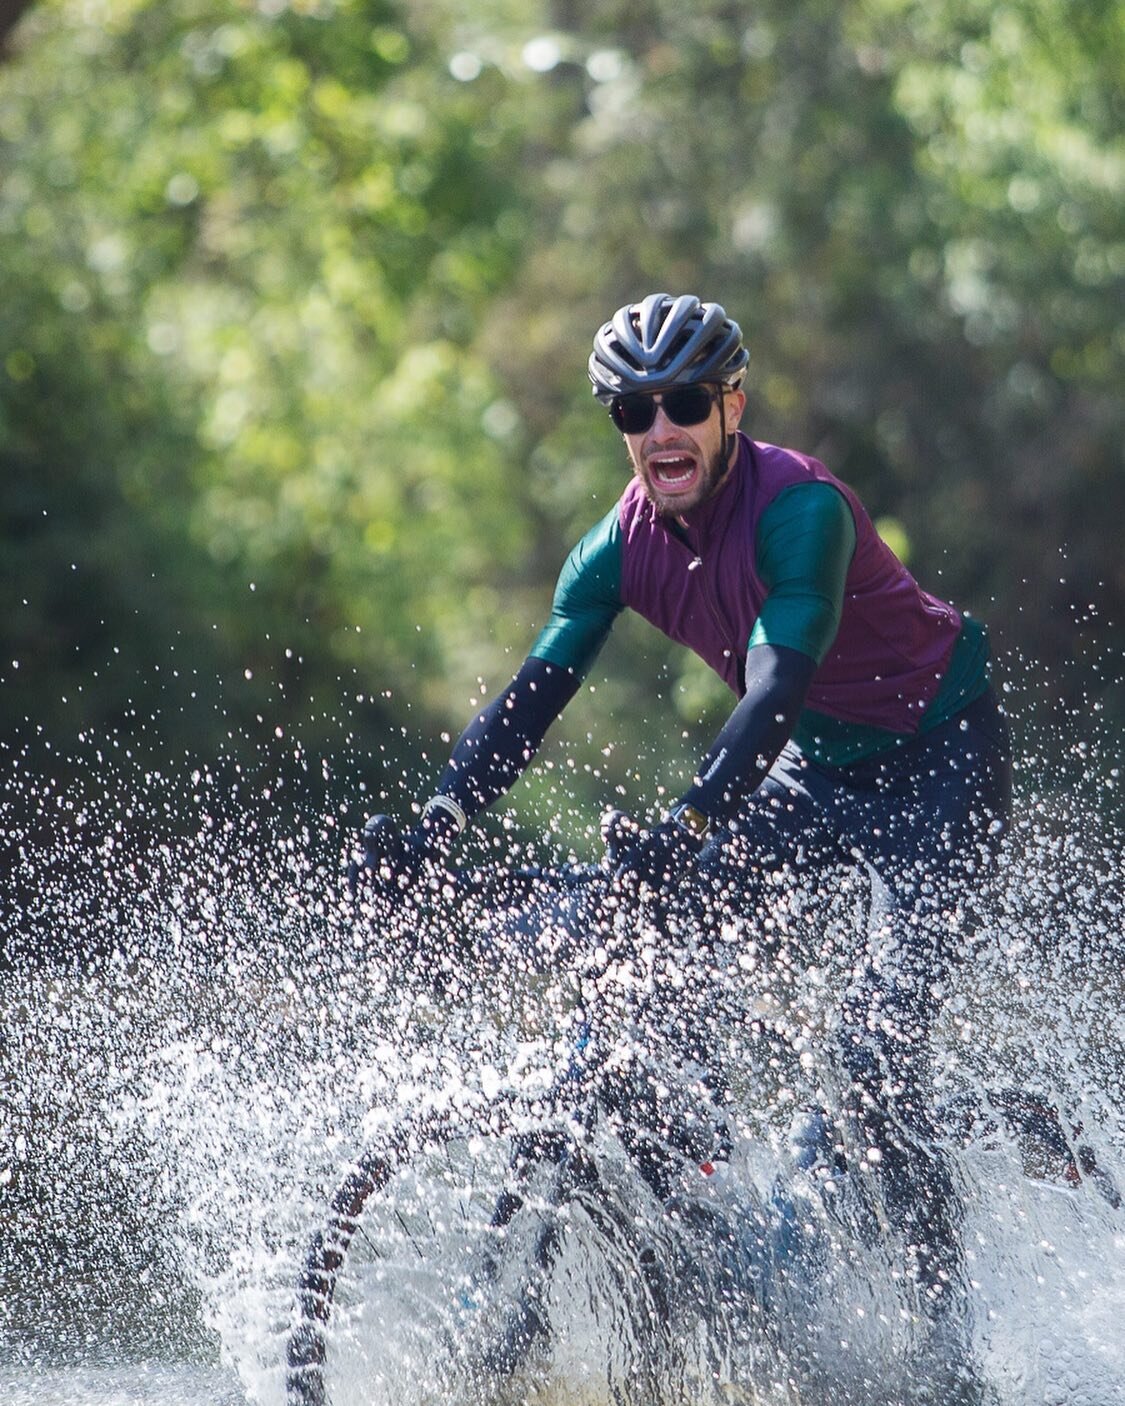 If you rode the gravel routes Saturday, you likely saw our good friend and photographer @mycousin_venny (although she may have been hiding in the trees). She&rsquo;s working on the water crossing photos.  Here&rsquo;s a sample of what to expect and t